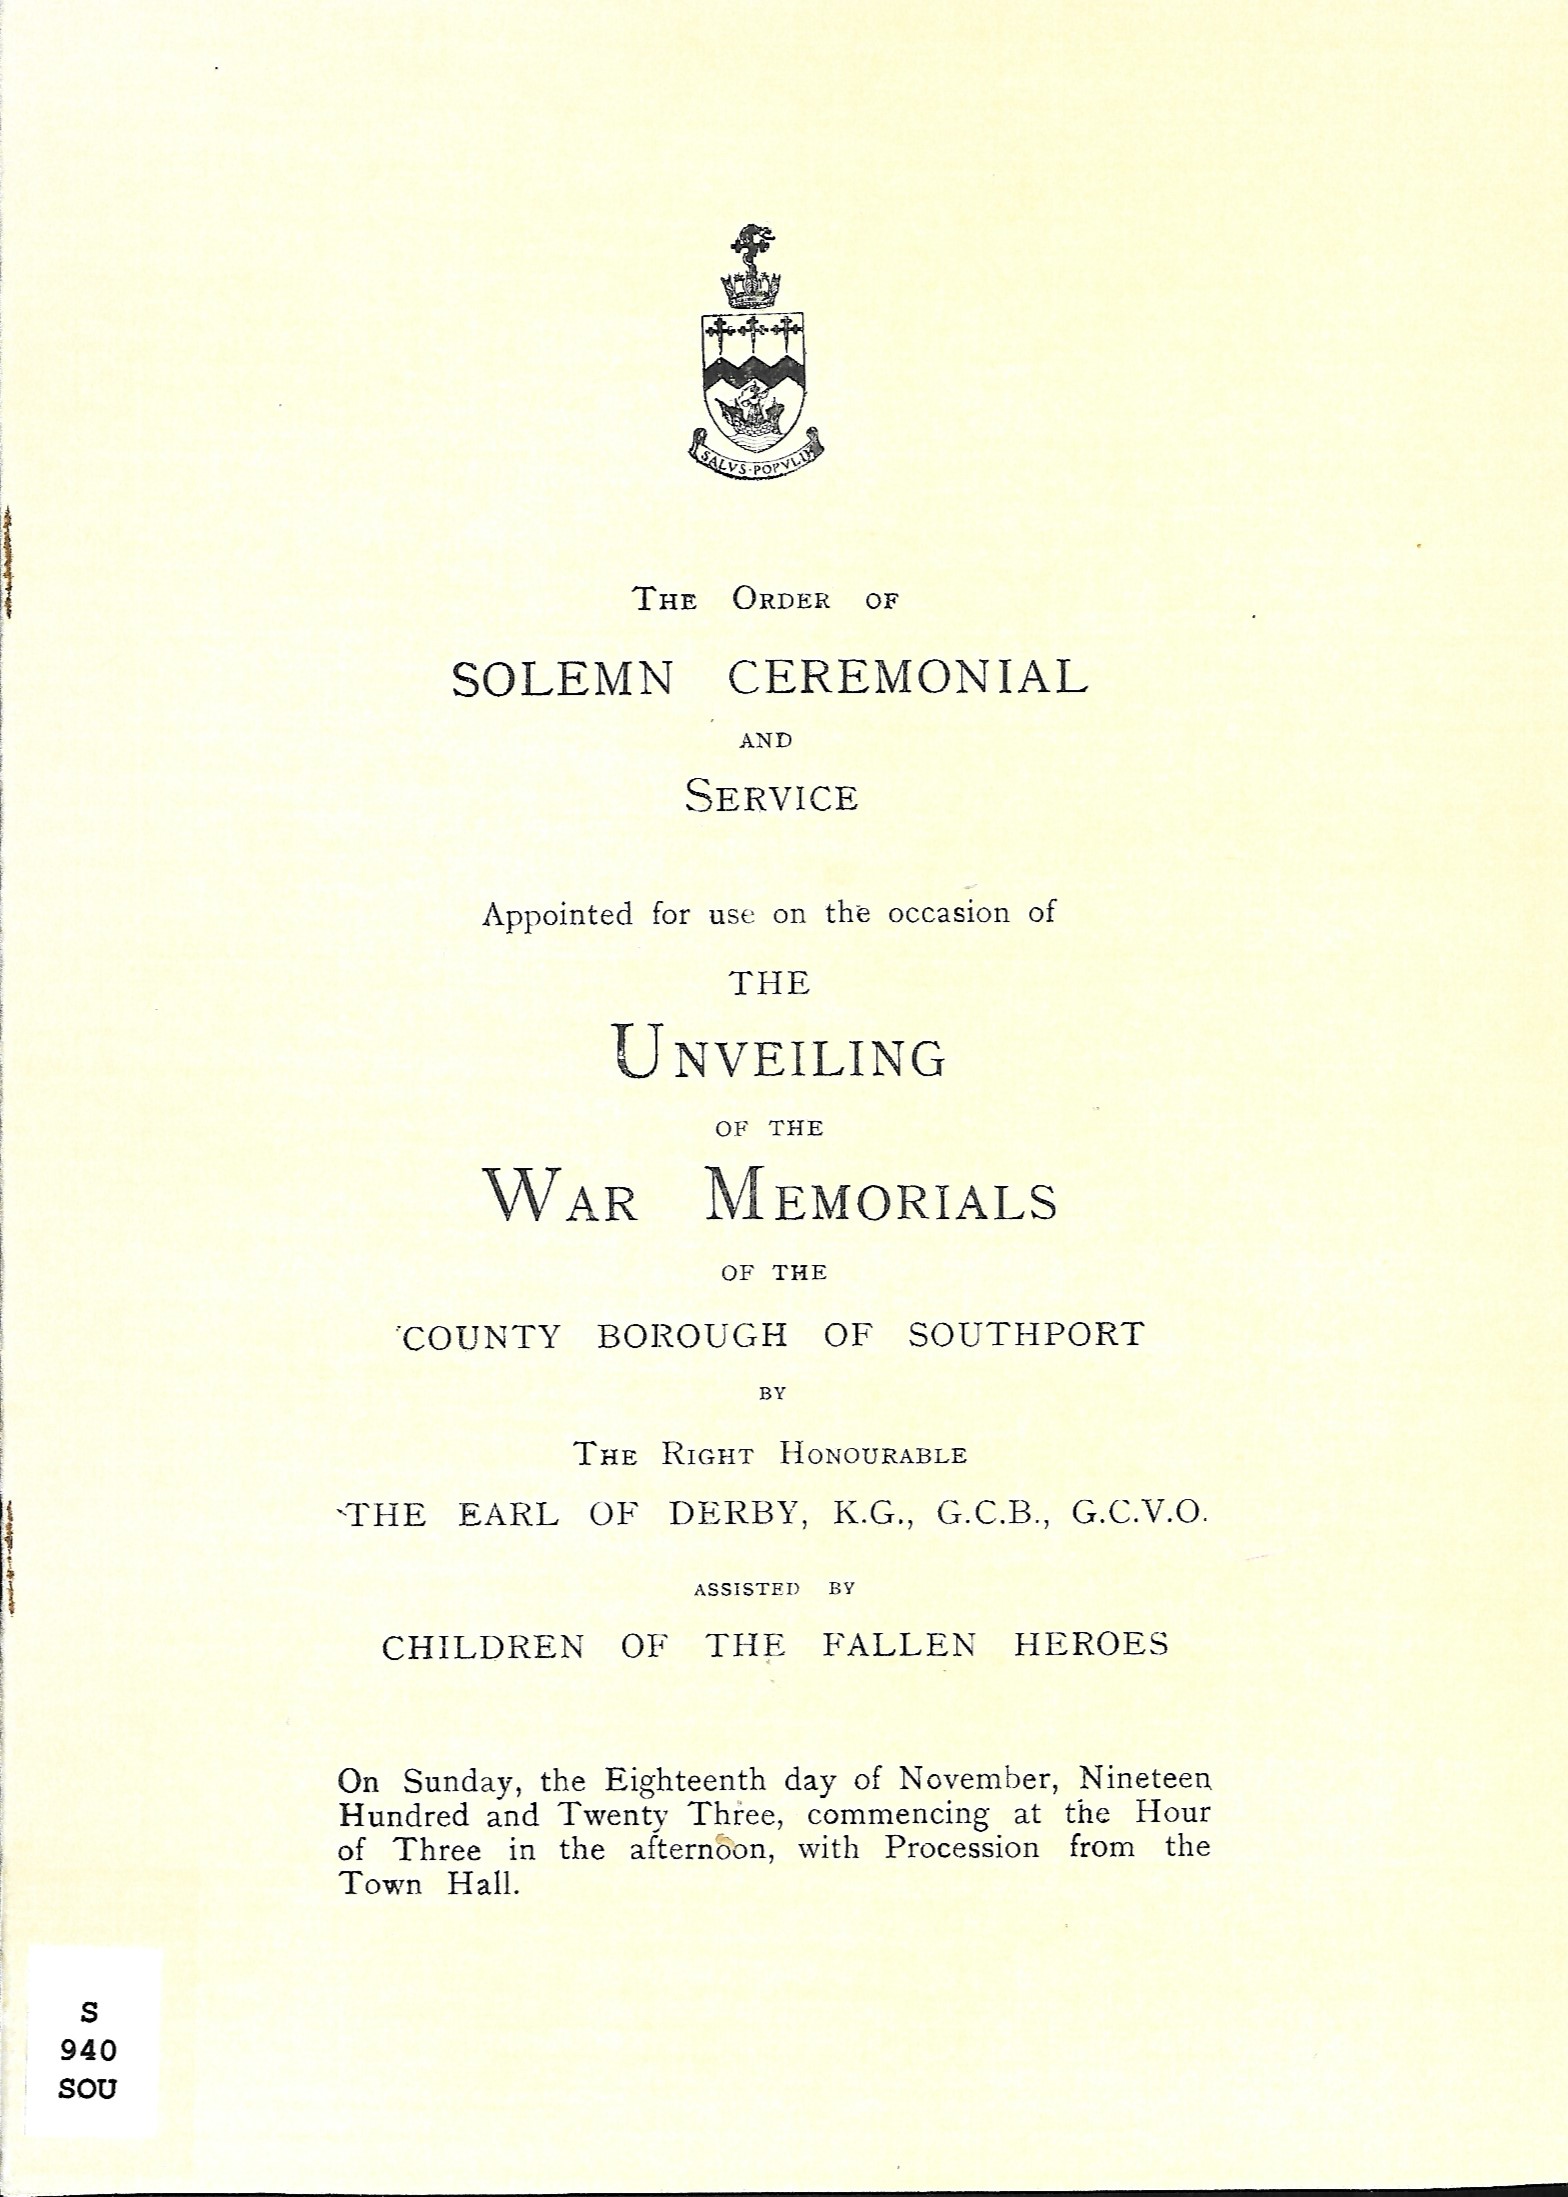 The service to mark the unveiling of Southport War Memorial in 1923